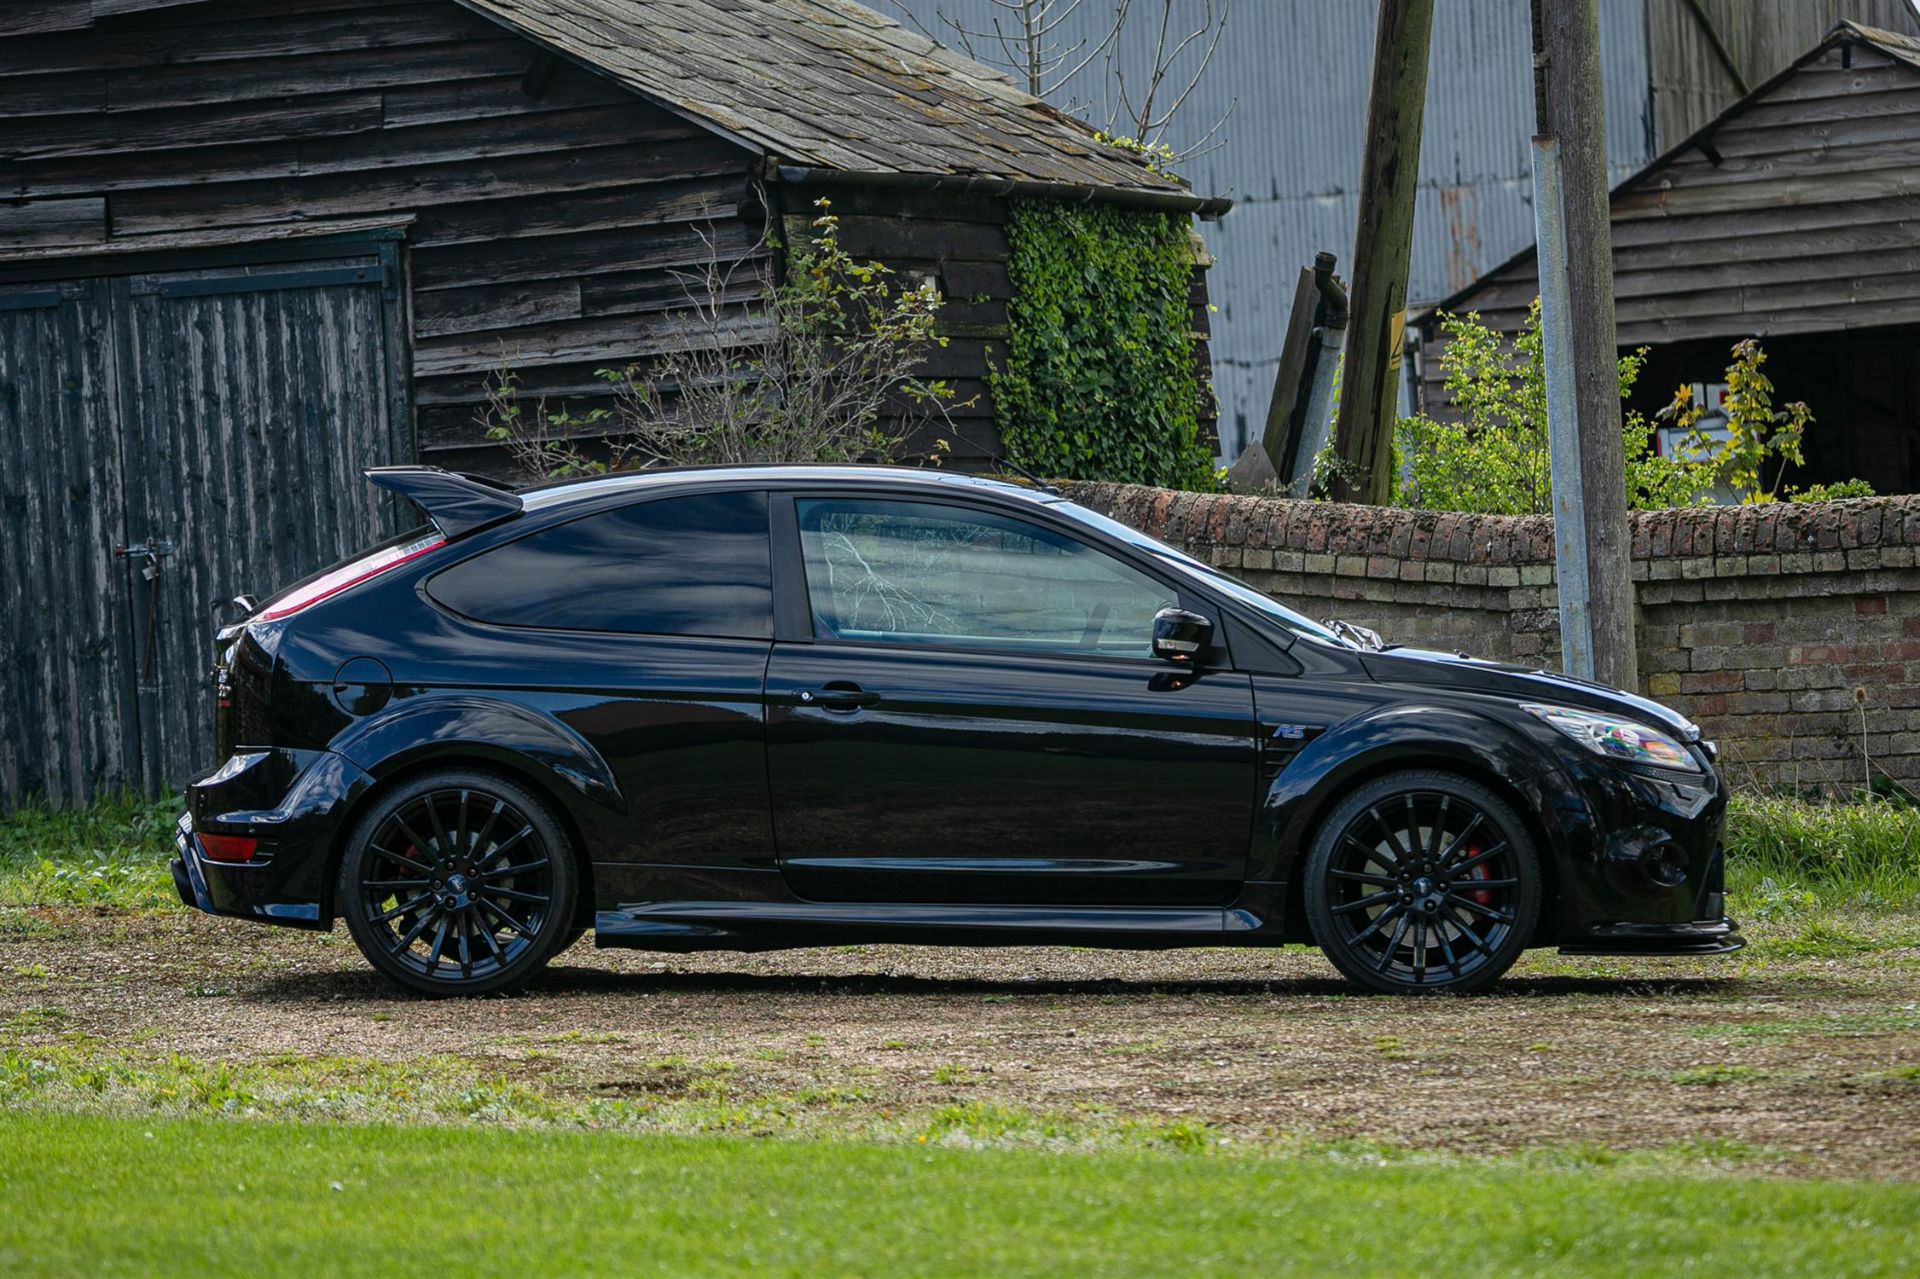 2010 Ford Focus RS500 #128 - 7,700 Miles - Image 5 of 10